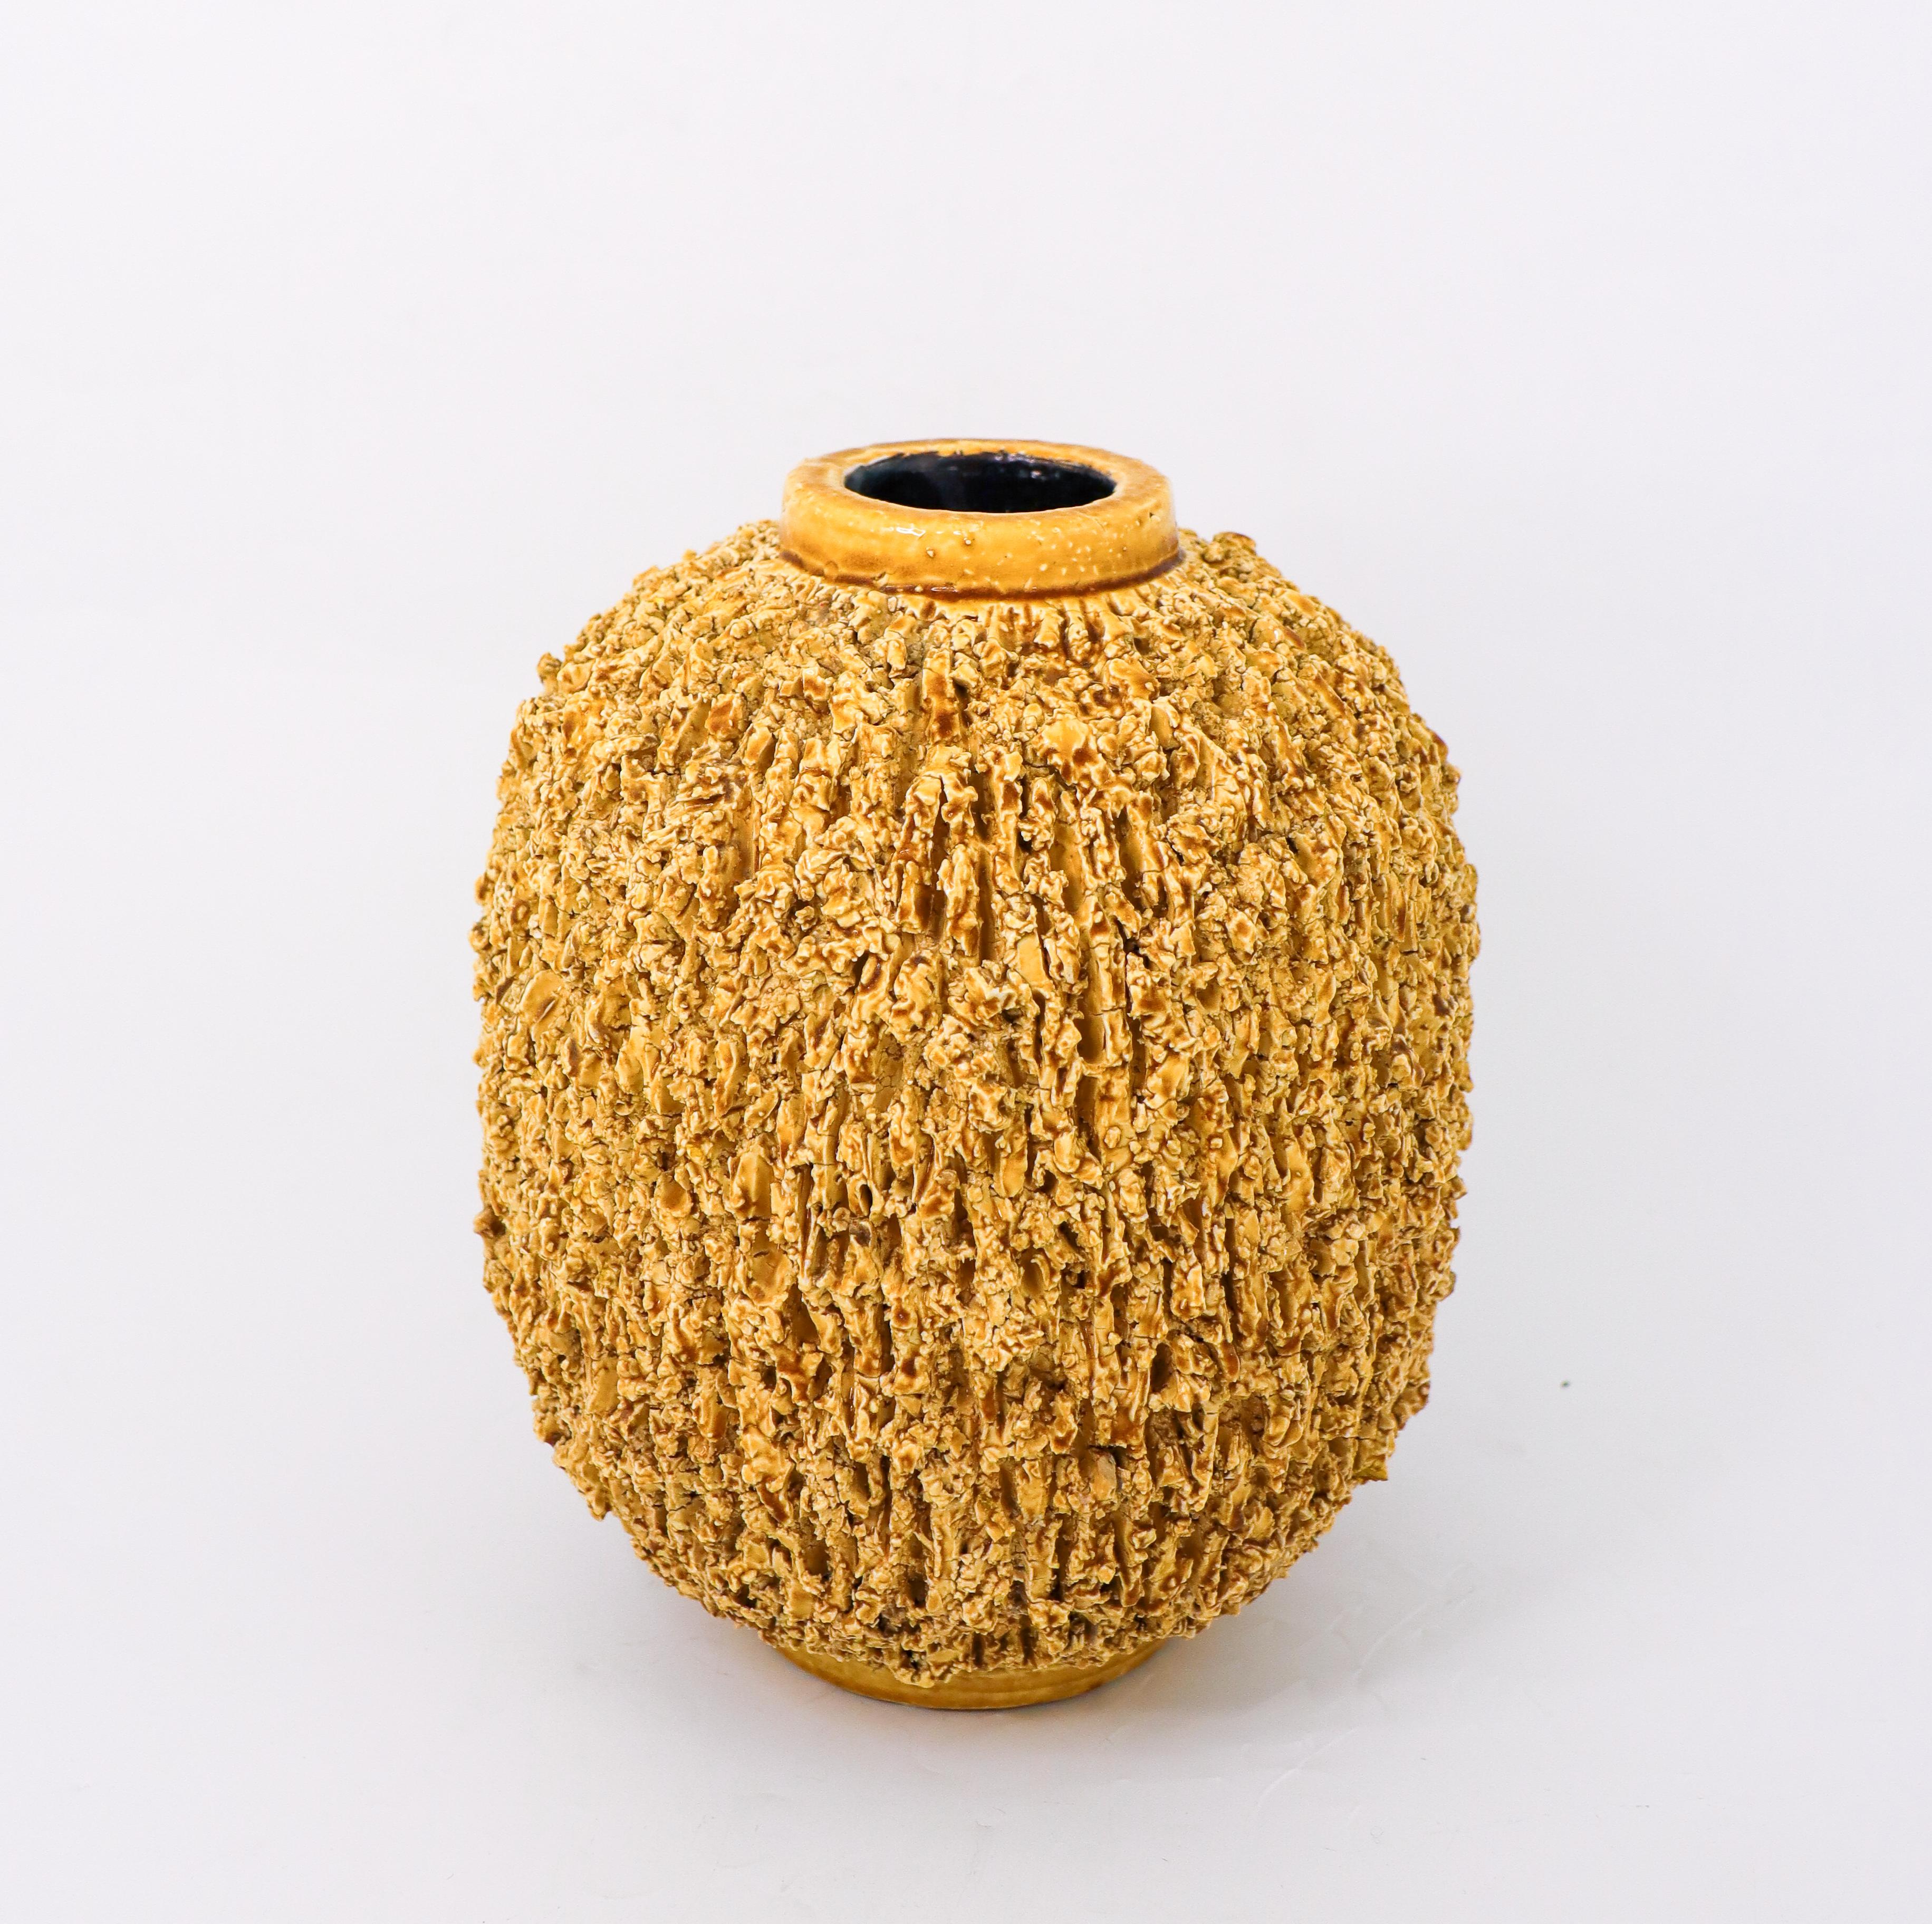 The largest yellow hedgehog vase designed by Gunnar Nylund at Rörstrand, the vase is 21 cm high and it is in very good condition except from some minor cracks at the base. It is marked below as on photo. These Hedgehog vases has become iconic for